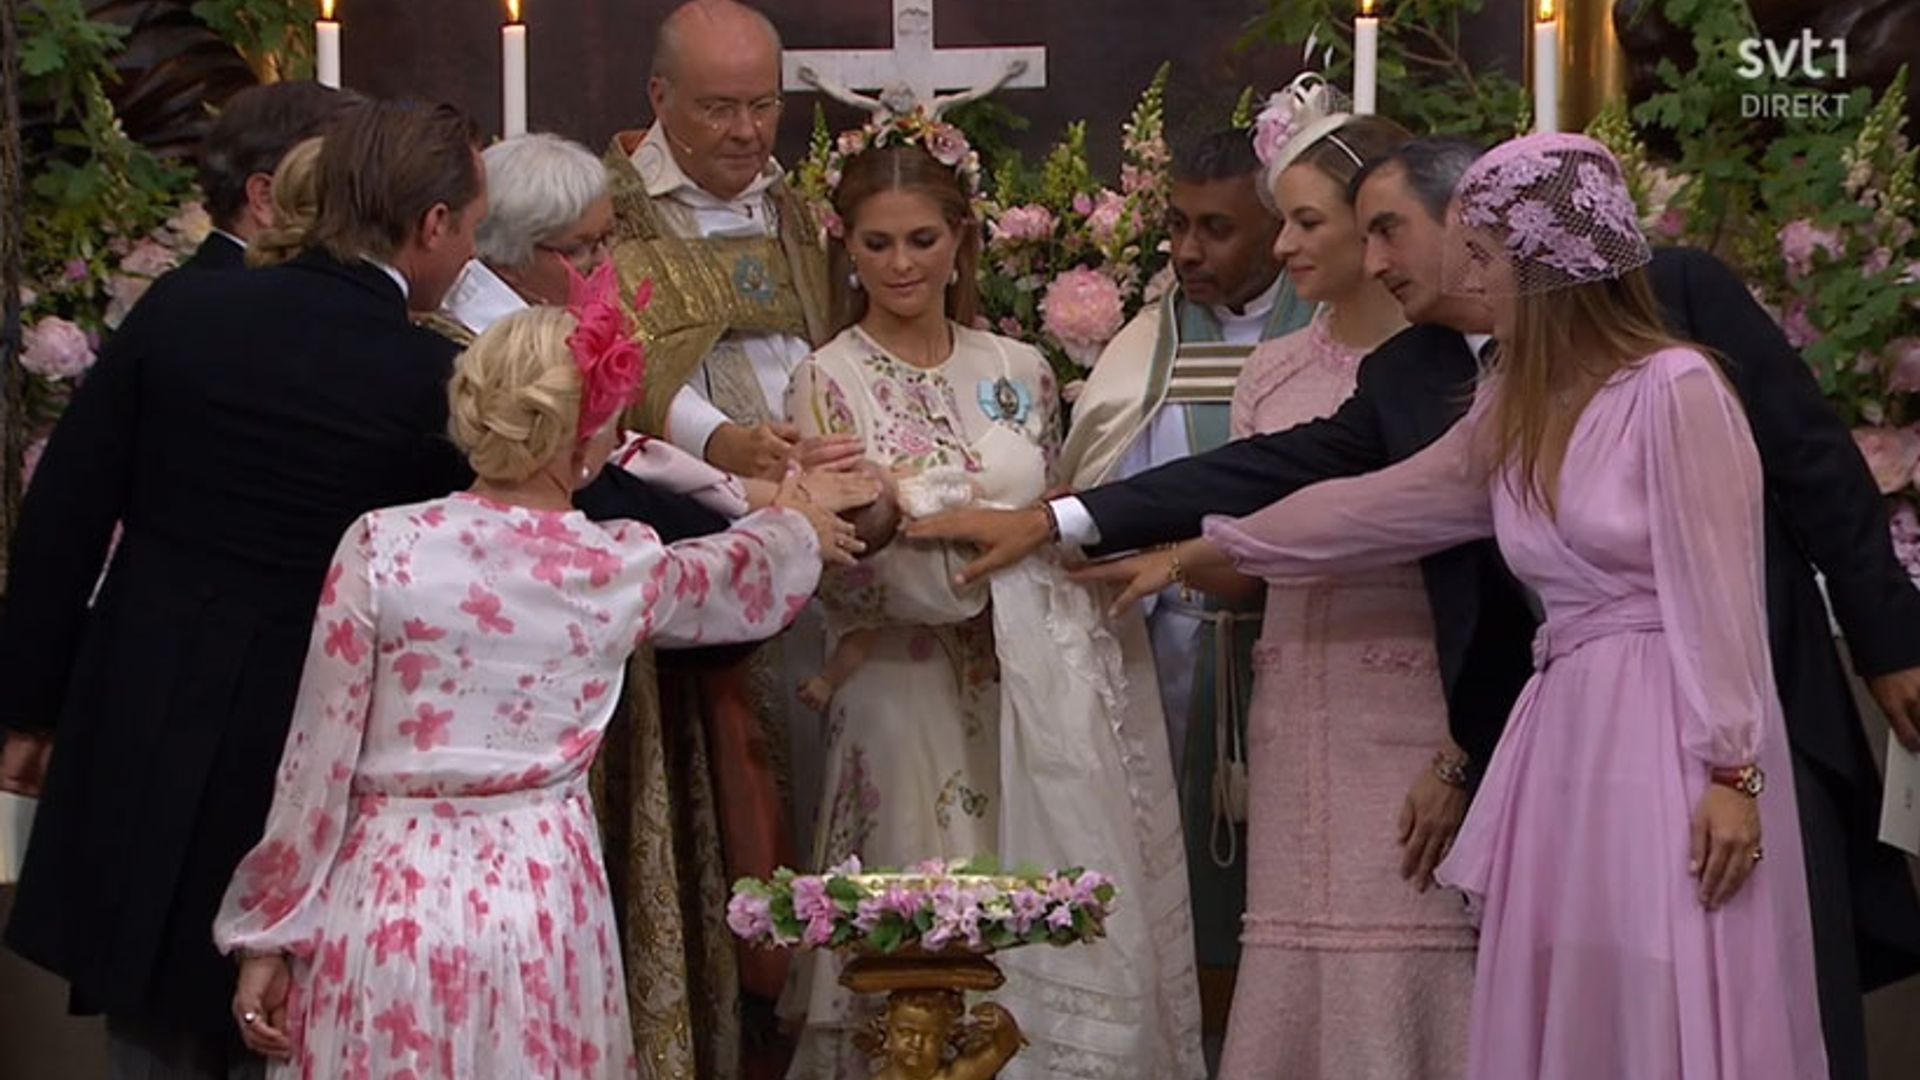 We need to talk about Princess Madeleine's AMAZING flower crown